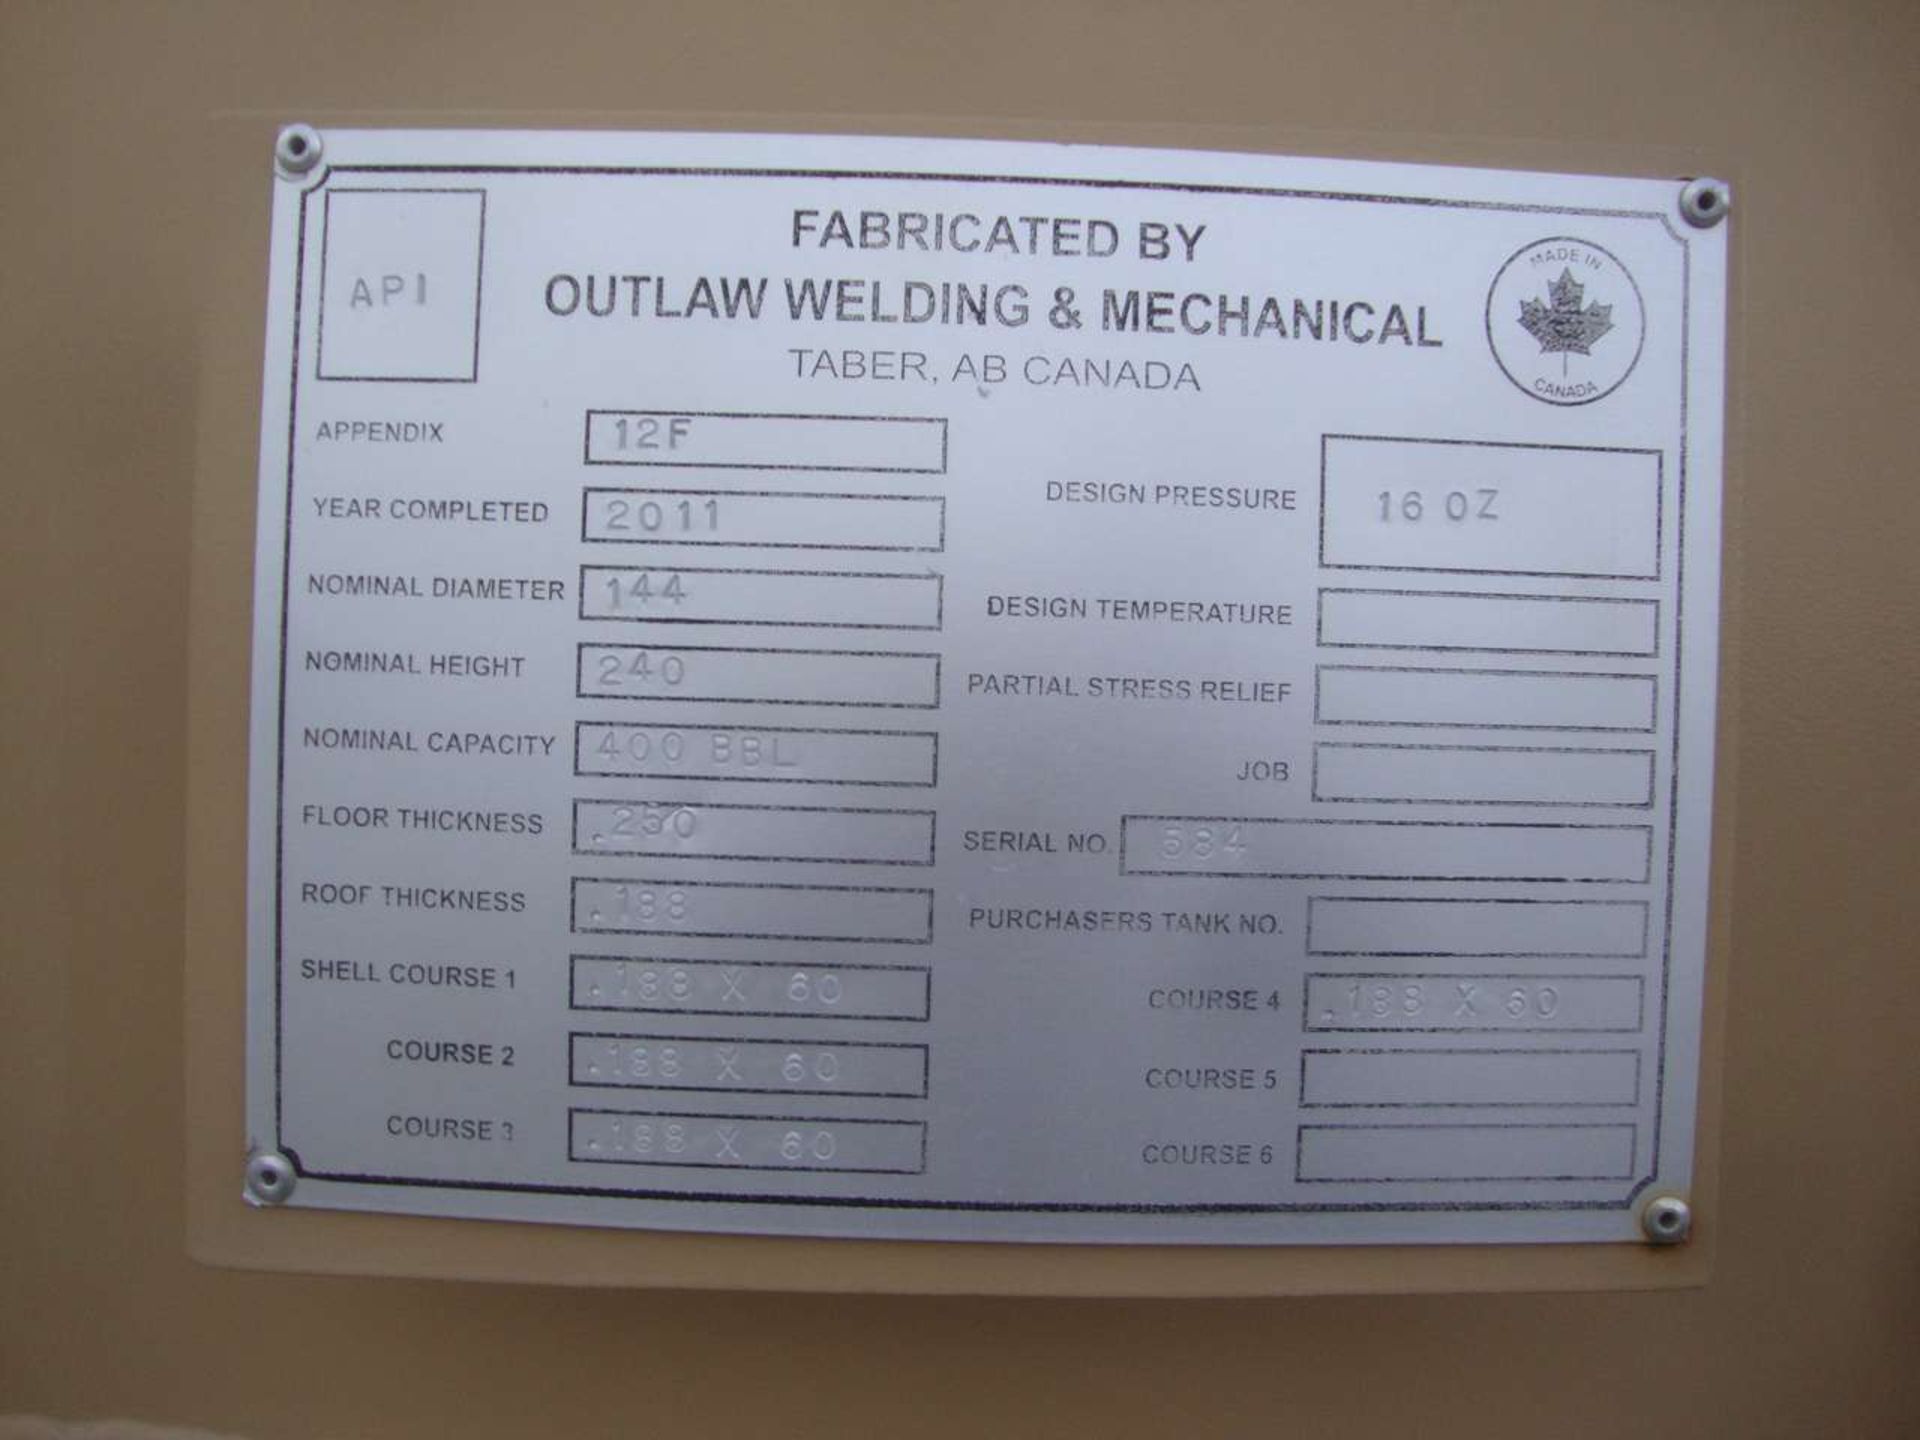 2011 Outlaw Welding Storage tank, 400 BBL - Image 2 of 2